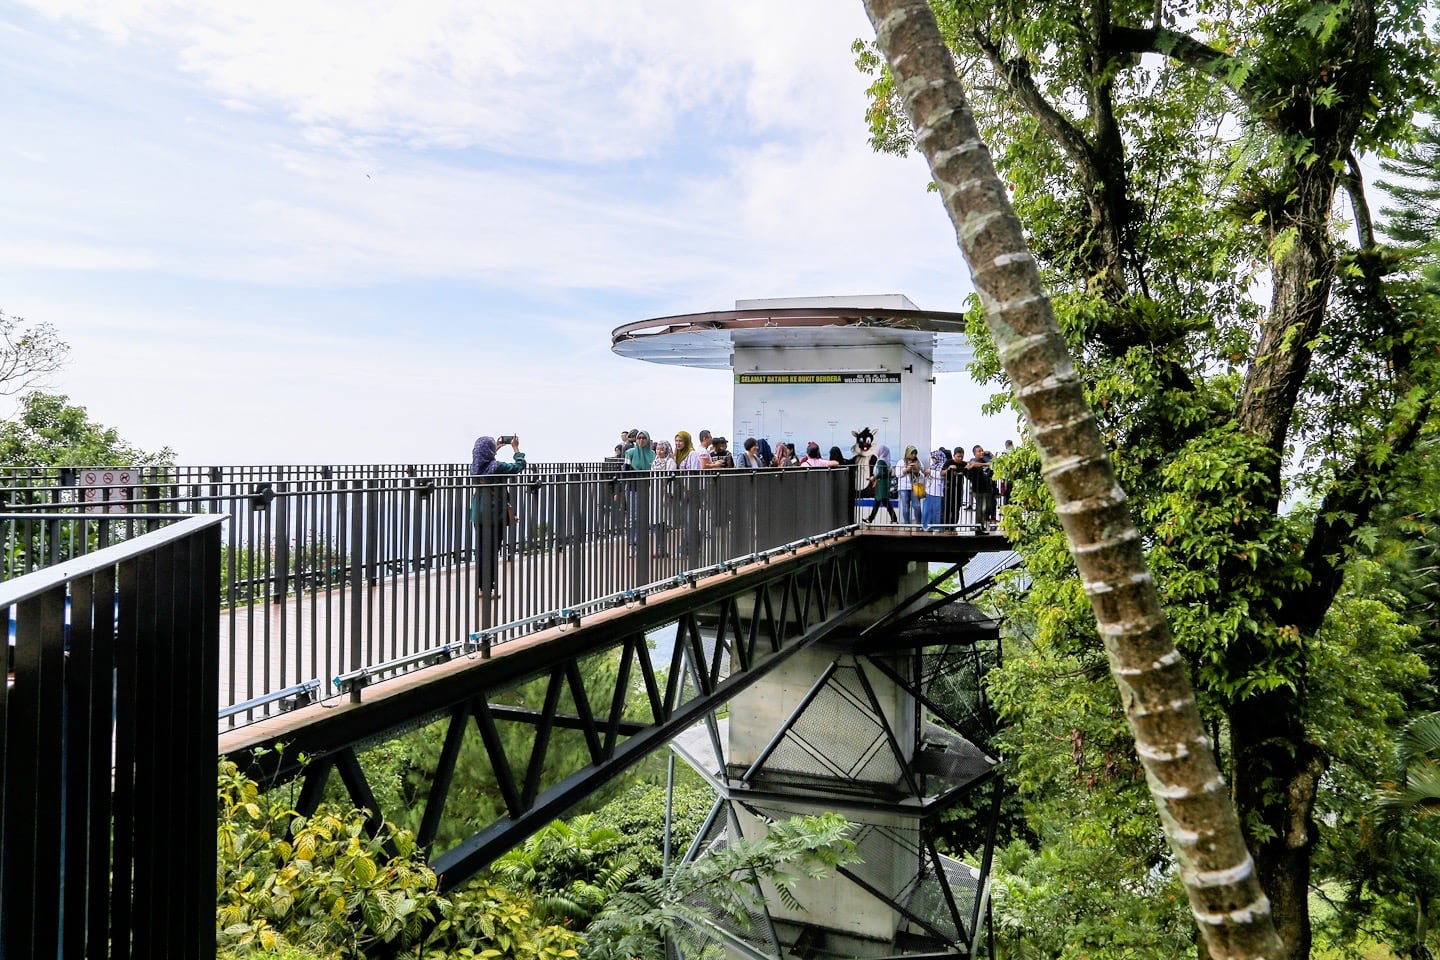 Penang Hill Malaysia viewing platform with crowds of visitors